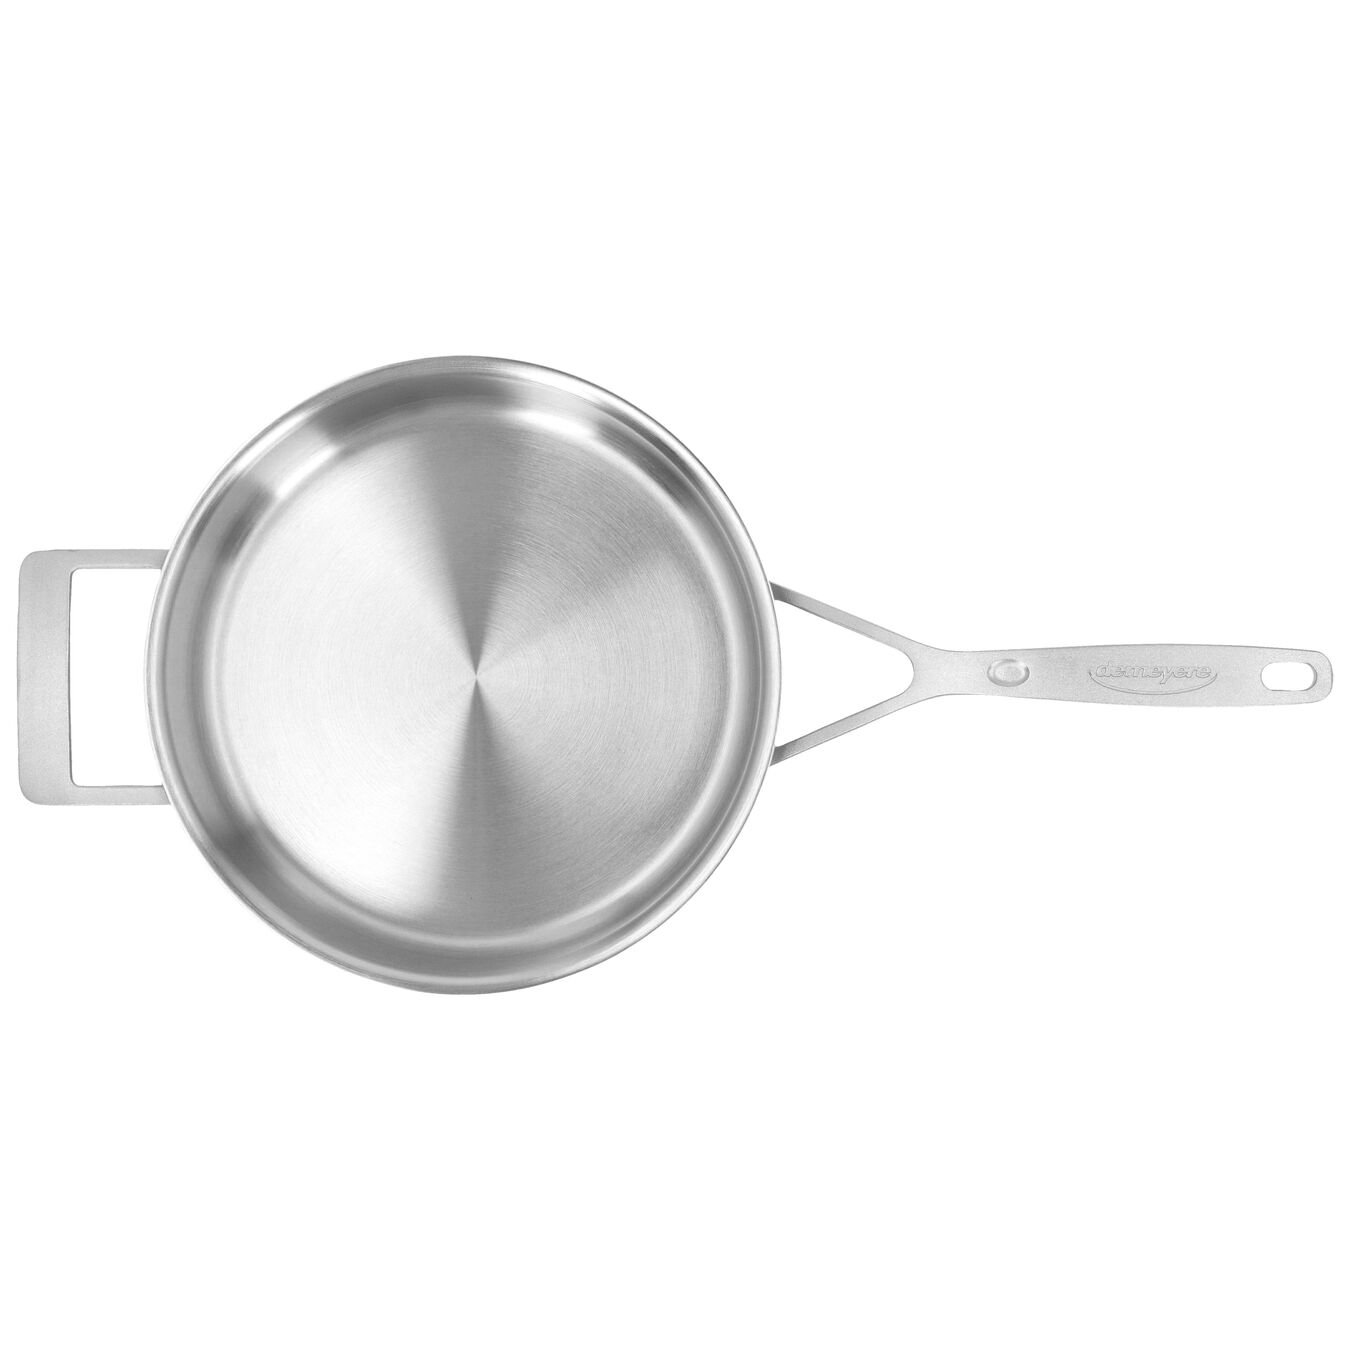 3 qt Sauté Pan with Helper Handle and Lid, 18/10 Stainless Steel ,,large 6